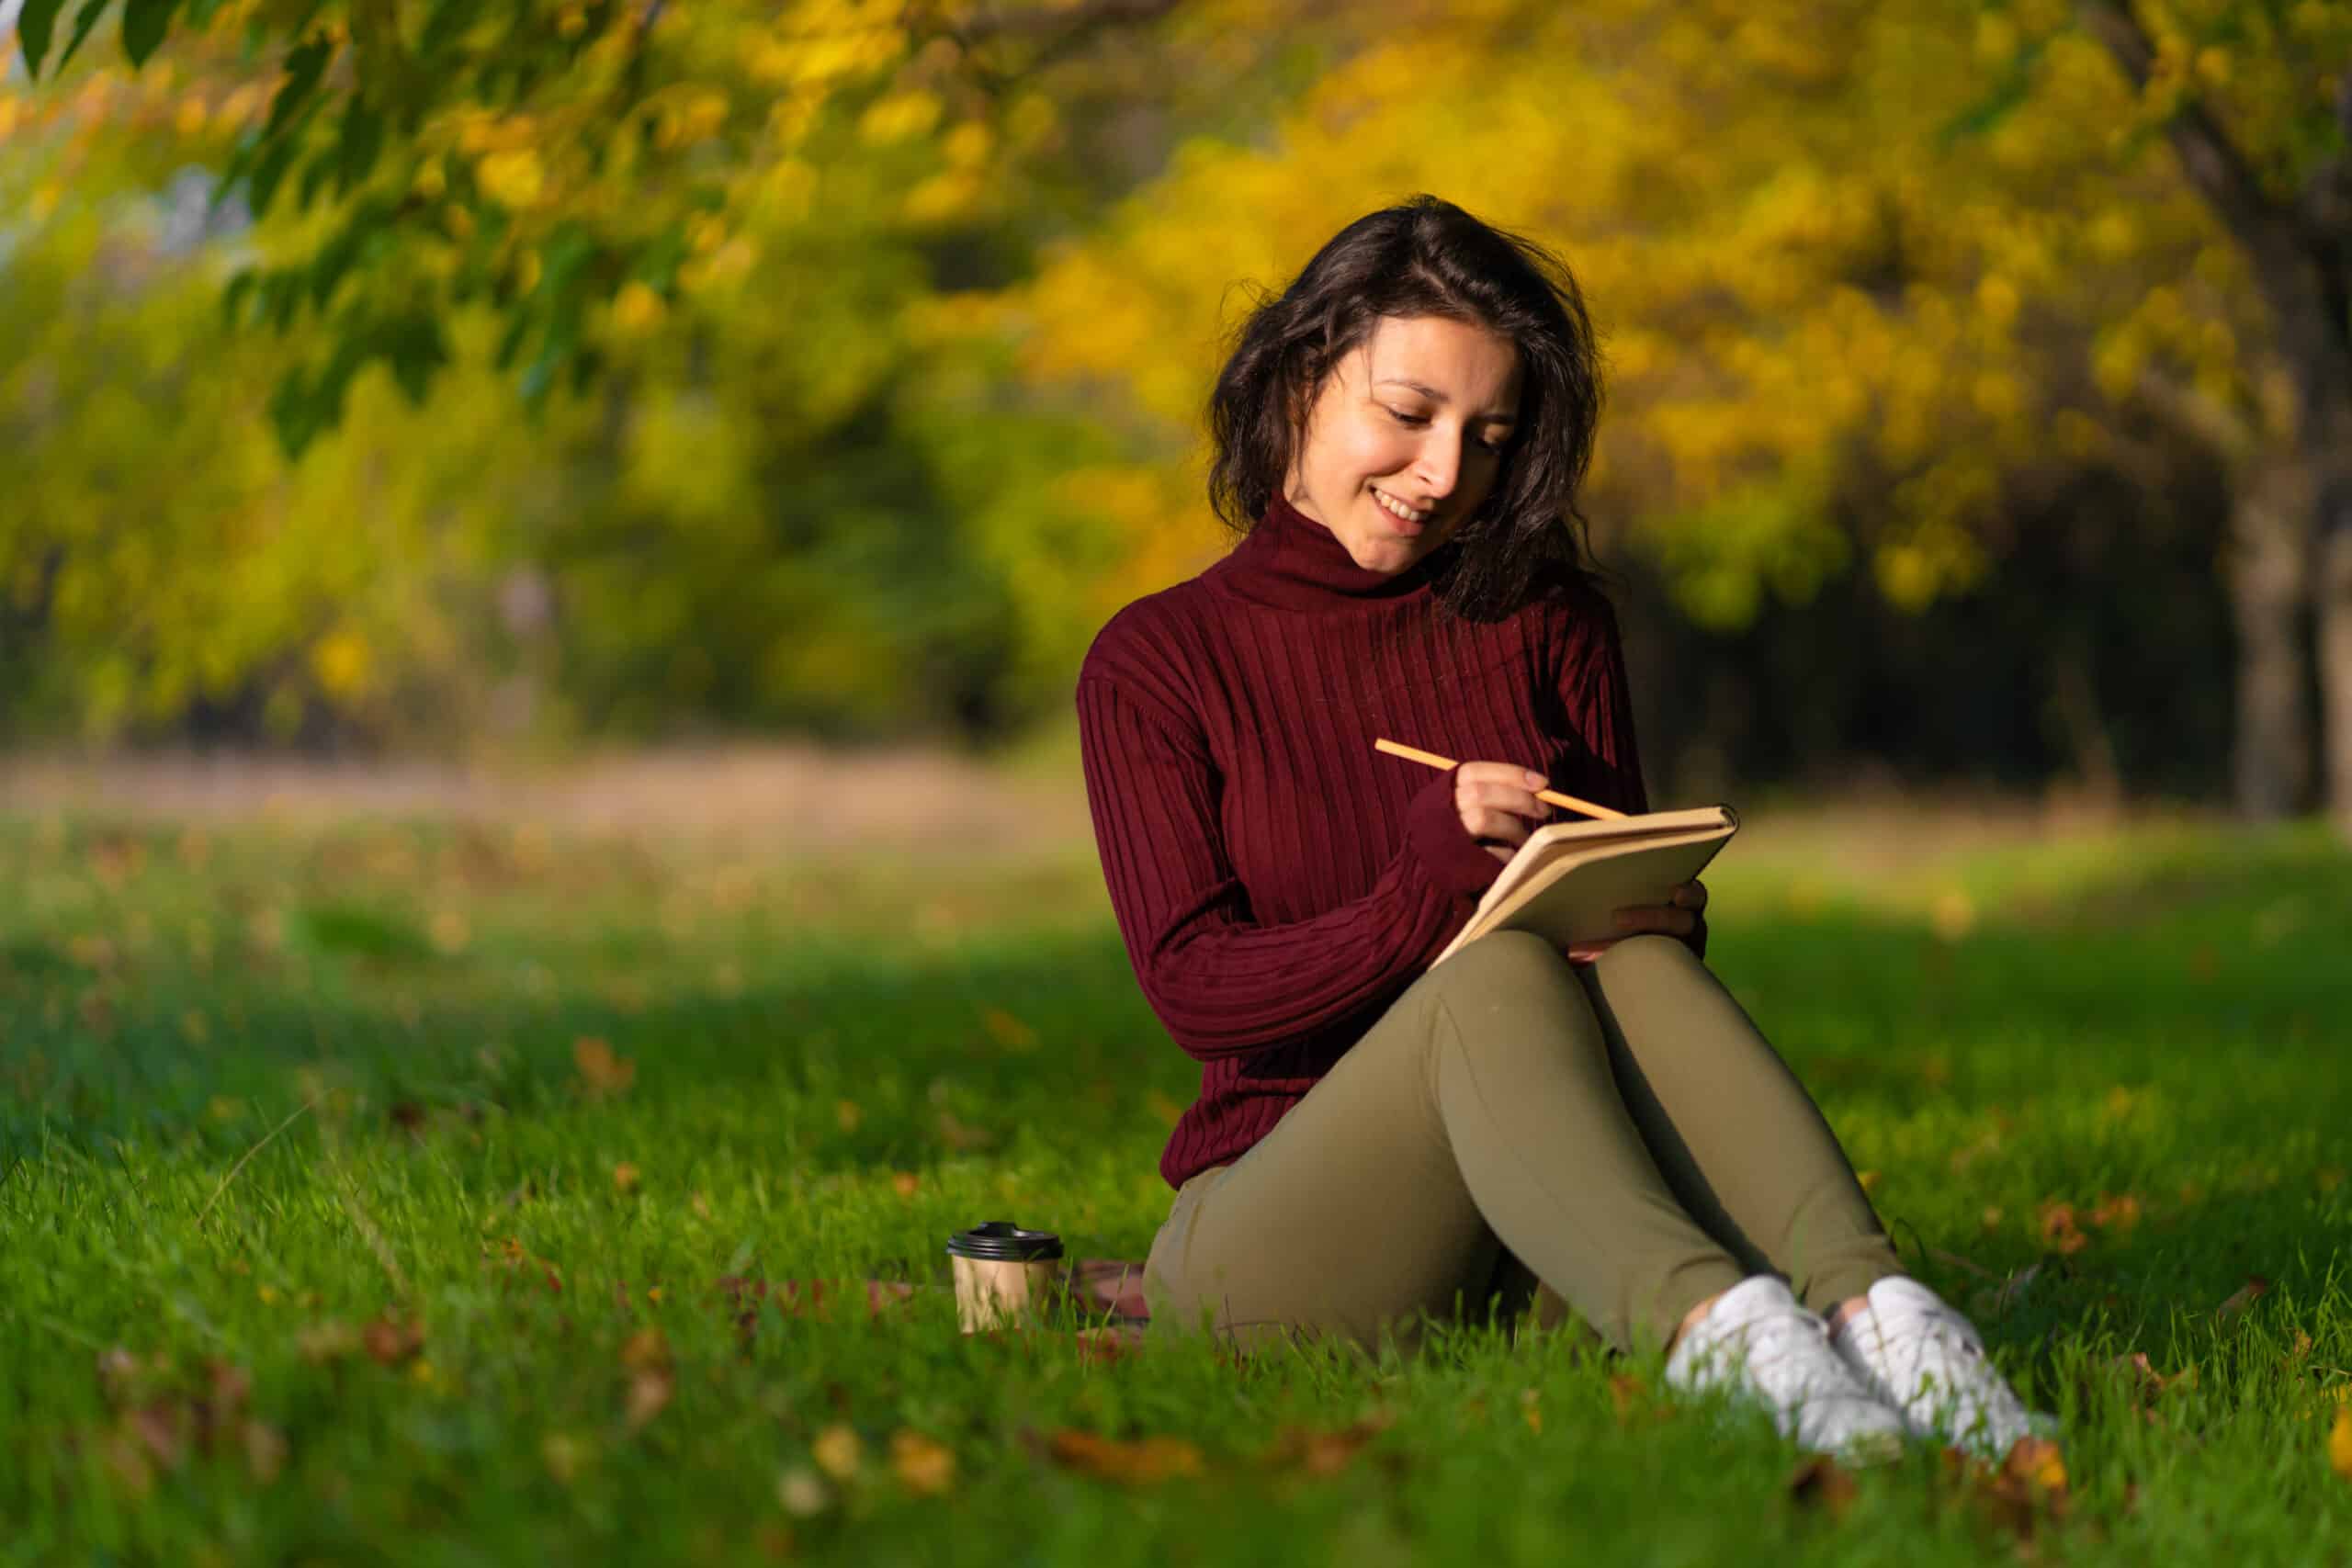 A nice woman writes in her notebook, sitting on a lawn in an autumn park